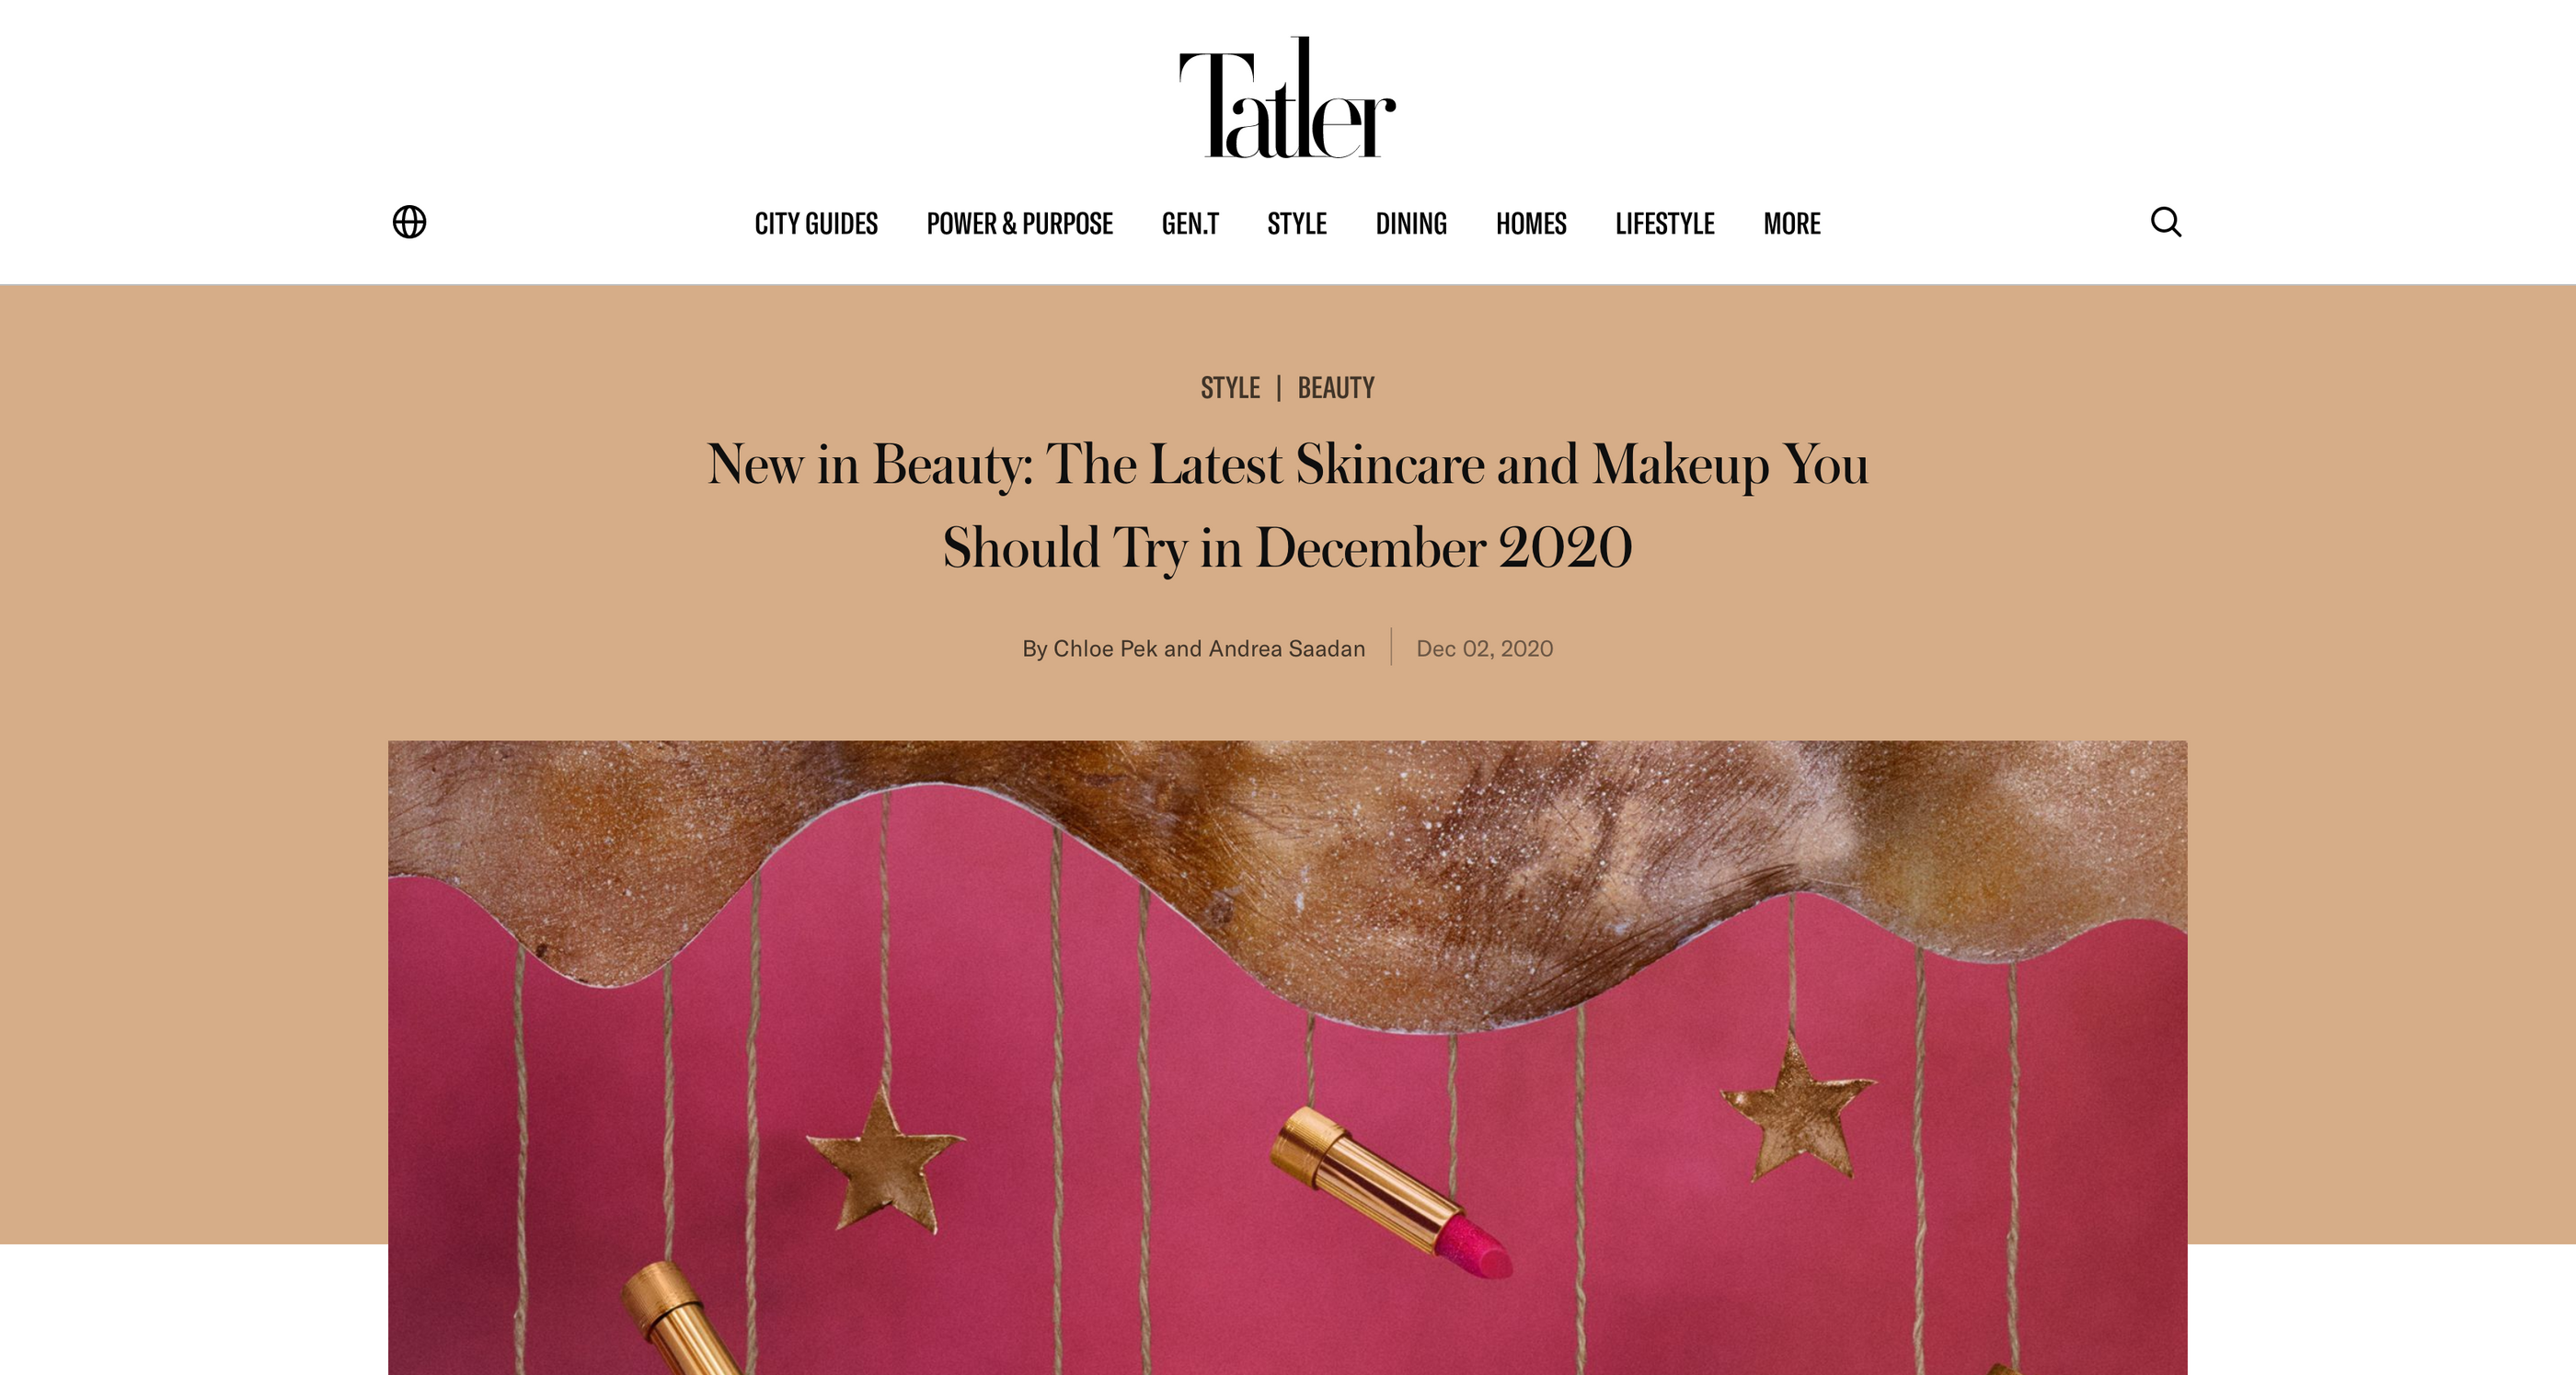 New In Beauty: The Latest Skincare And Makeup You Should Try In December 2020 by Tatler Singapore